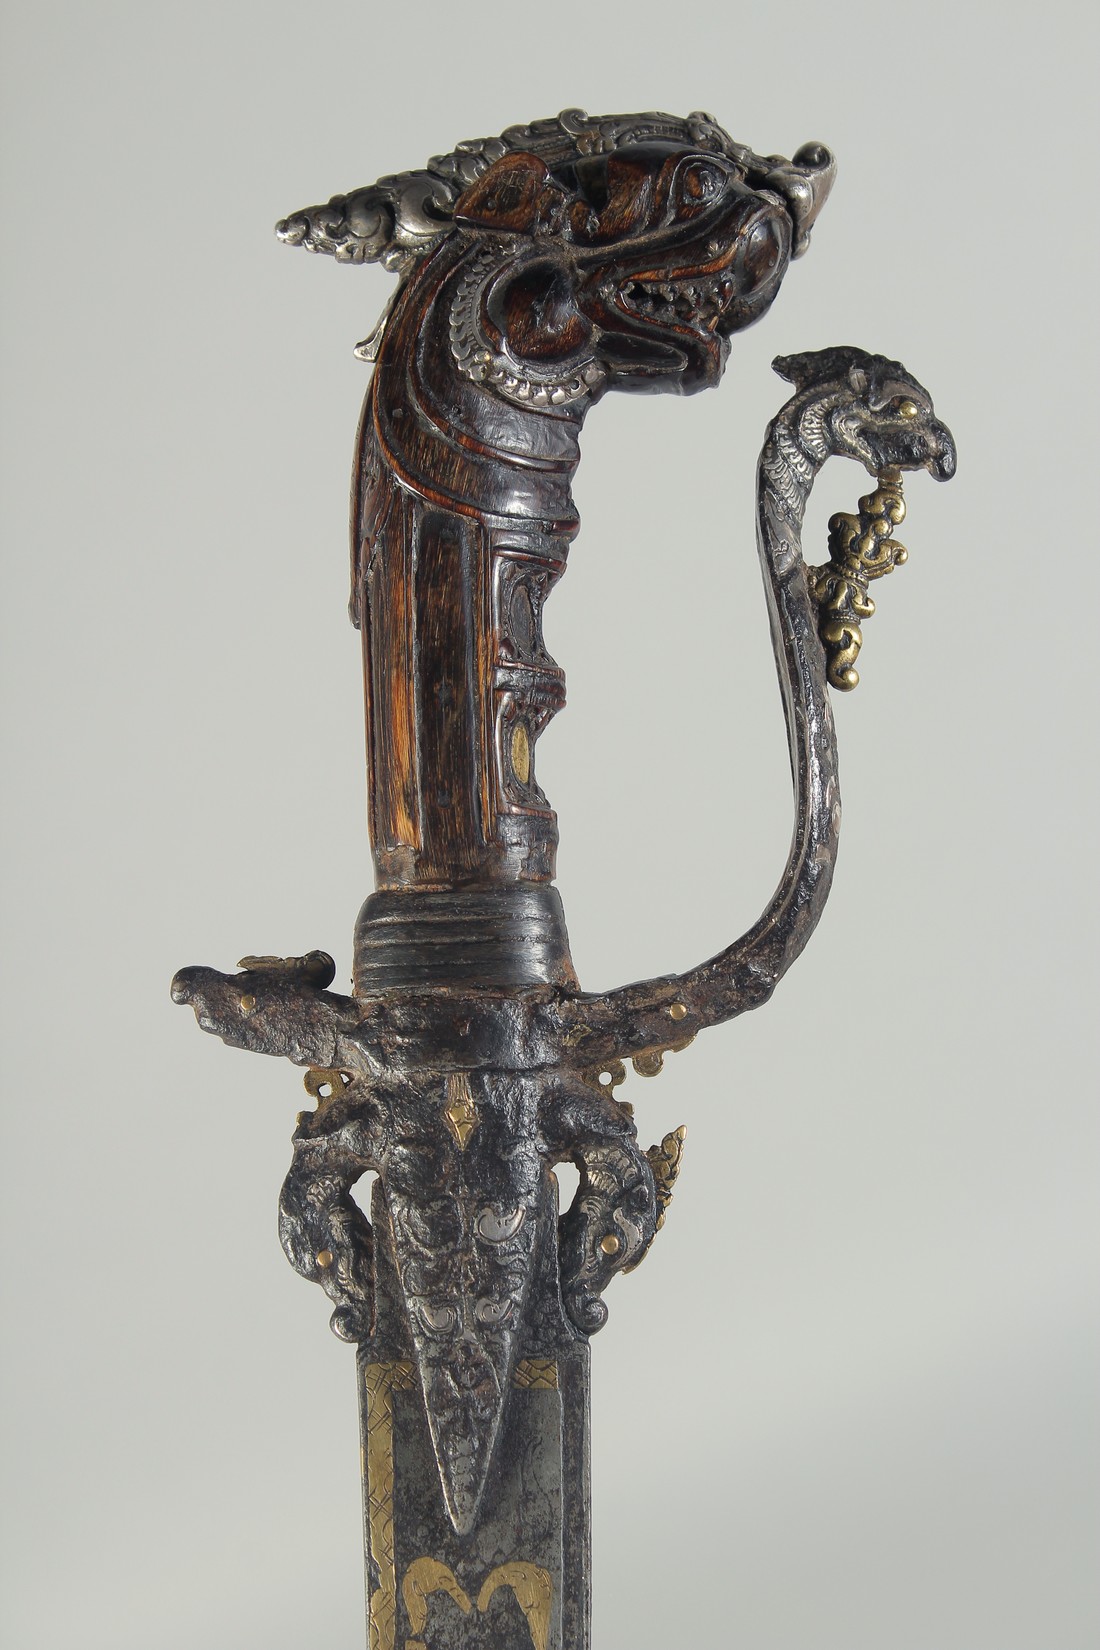 A RARE 17TH CENTURY CEYLONESE SRI LANKAN KASTANE SWORD, with carved silver mounted rhino horn handle - Image 4 of 8